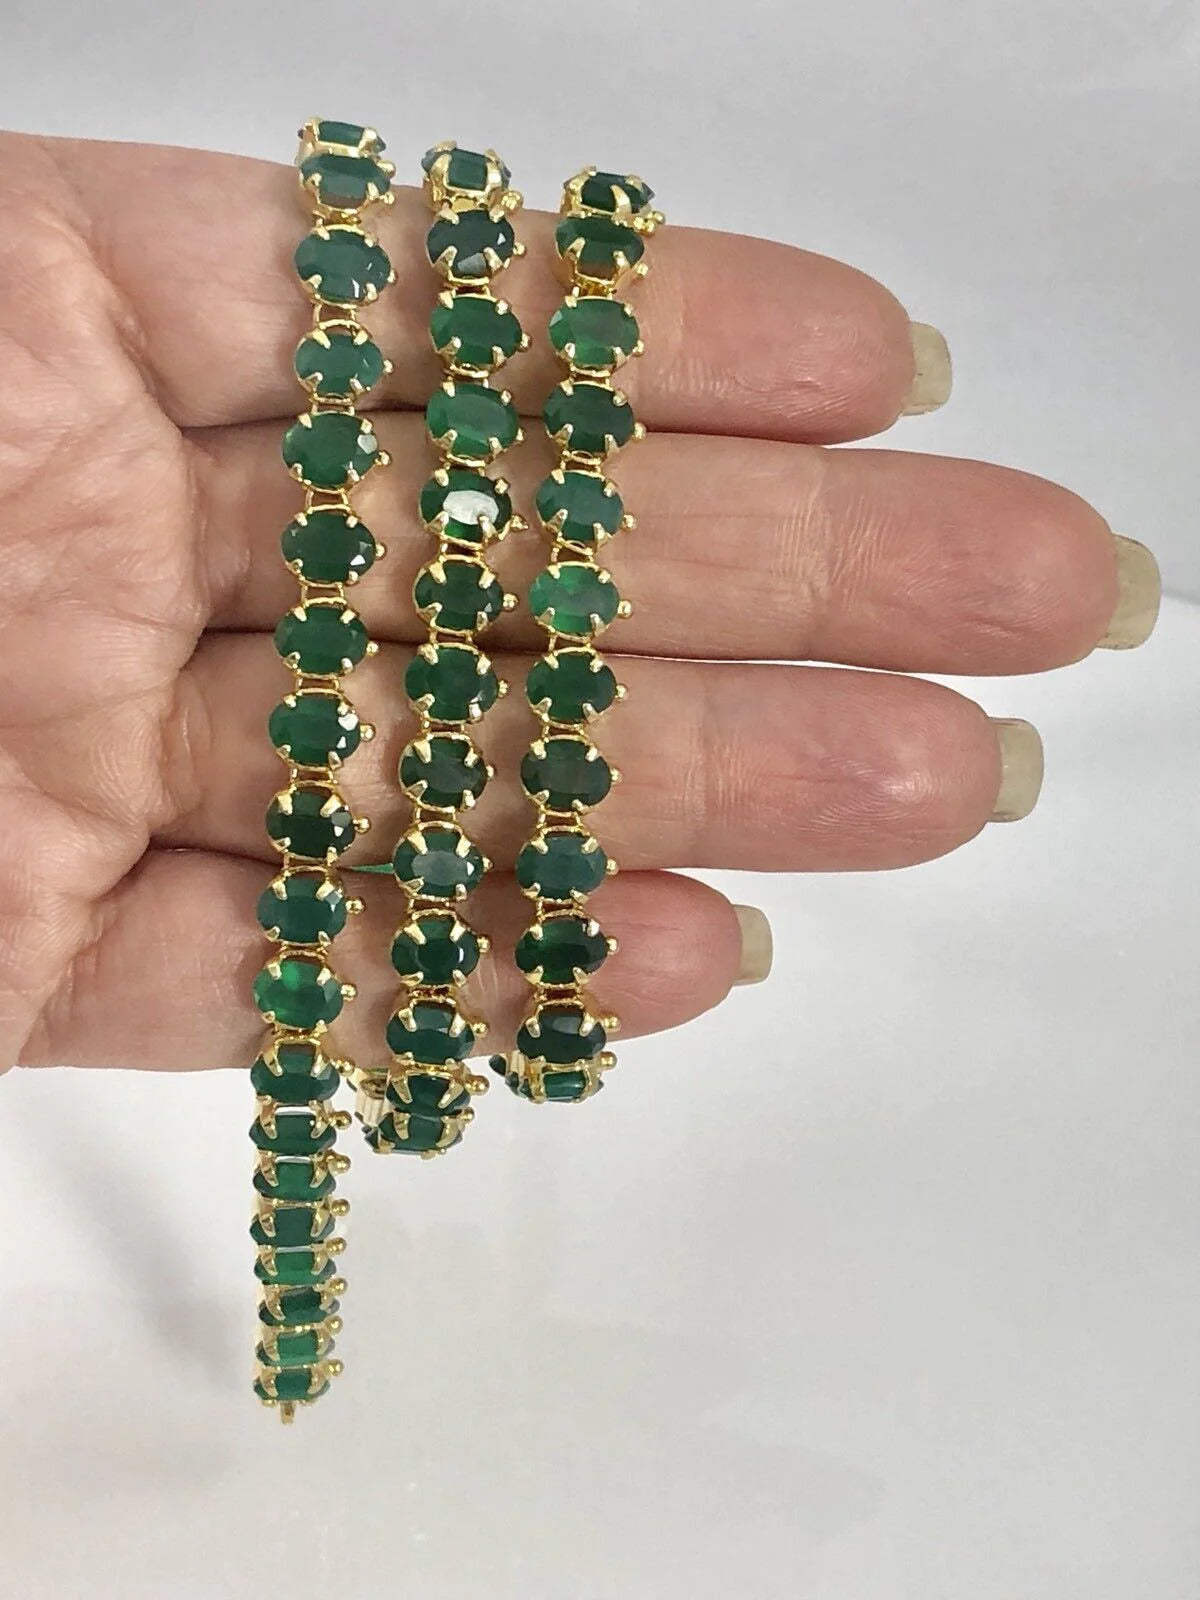 Genuine Green Chalcedony (46.5ctw) 18kt Yellow Gold Overlay Necklace, 24", New